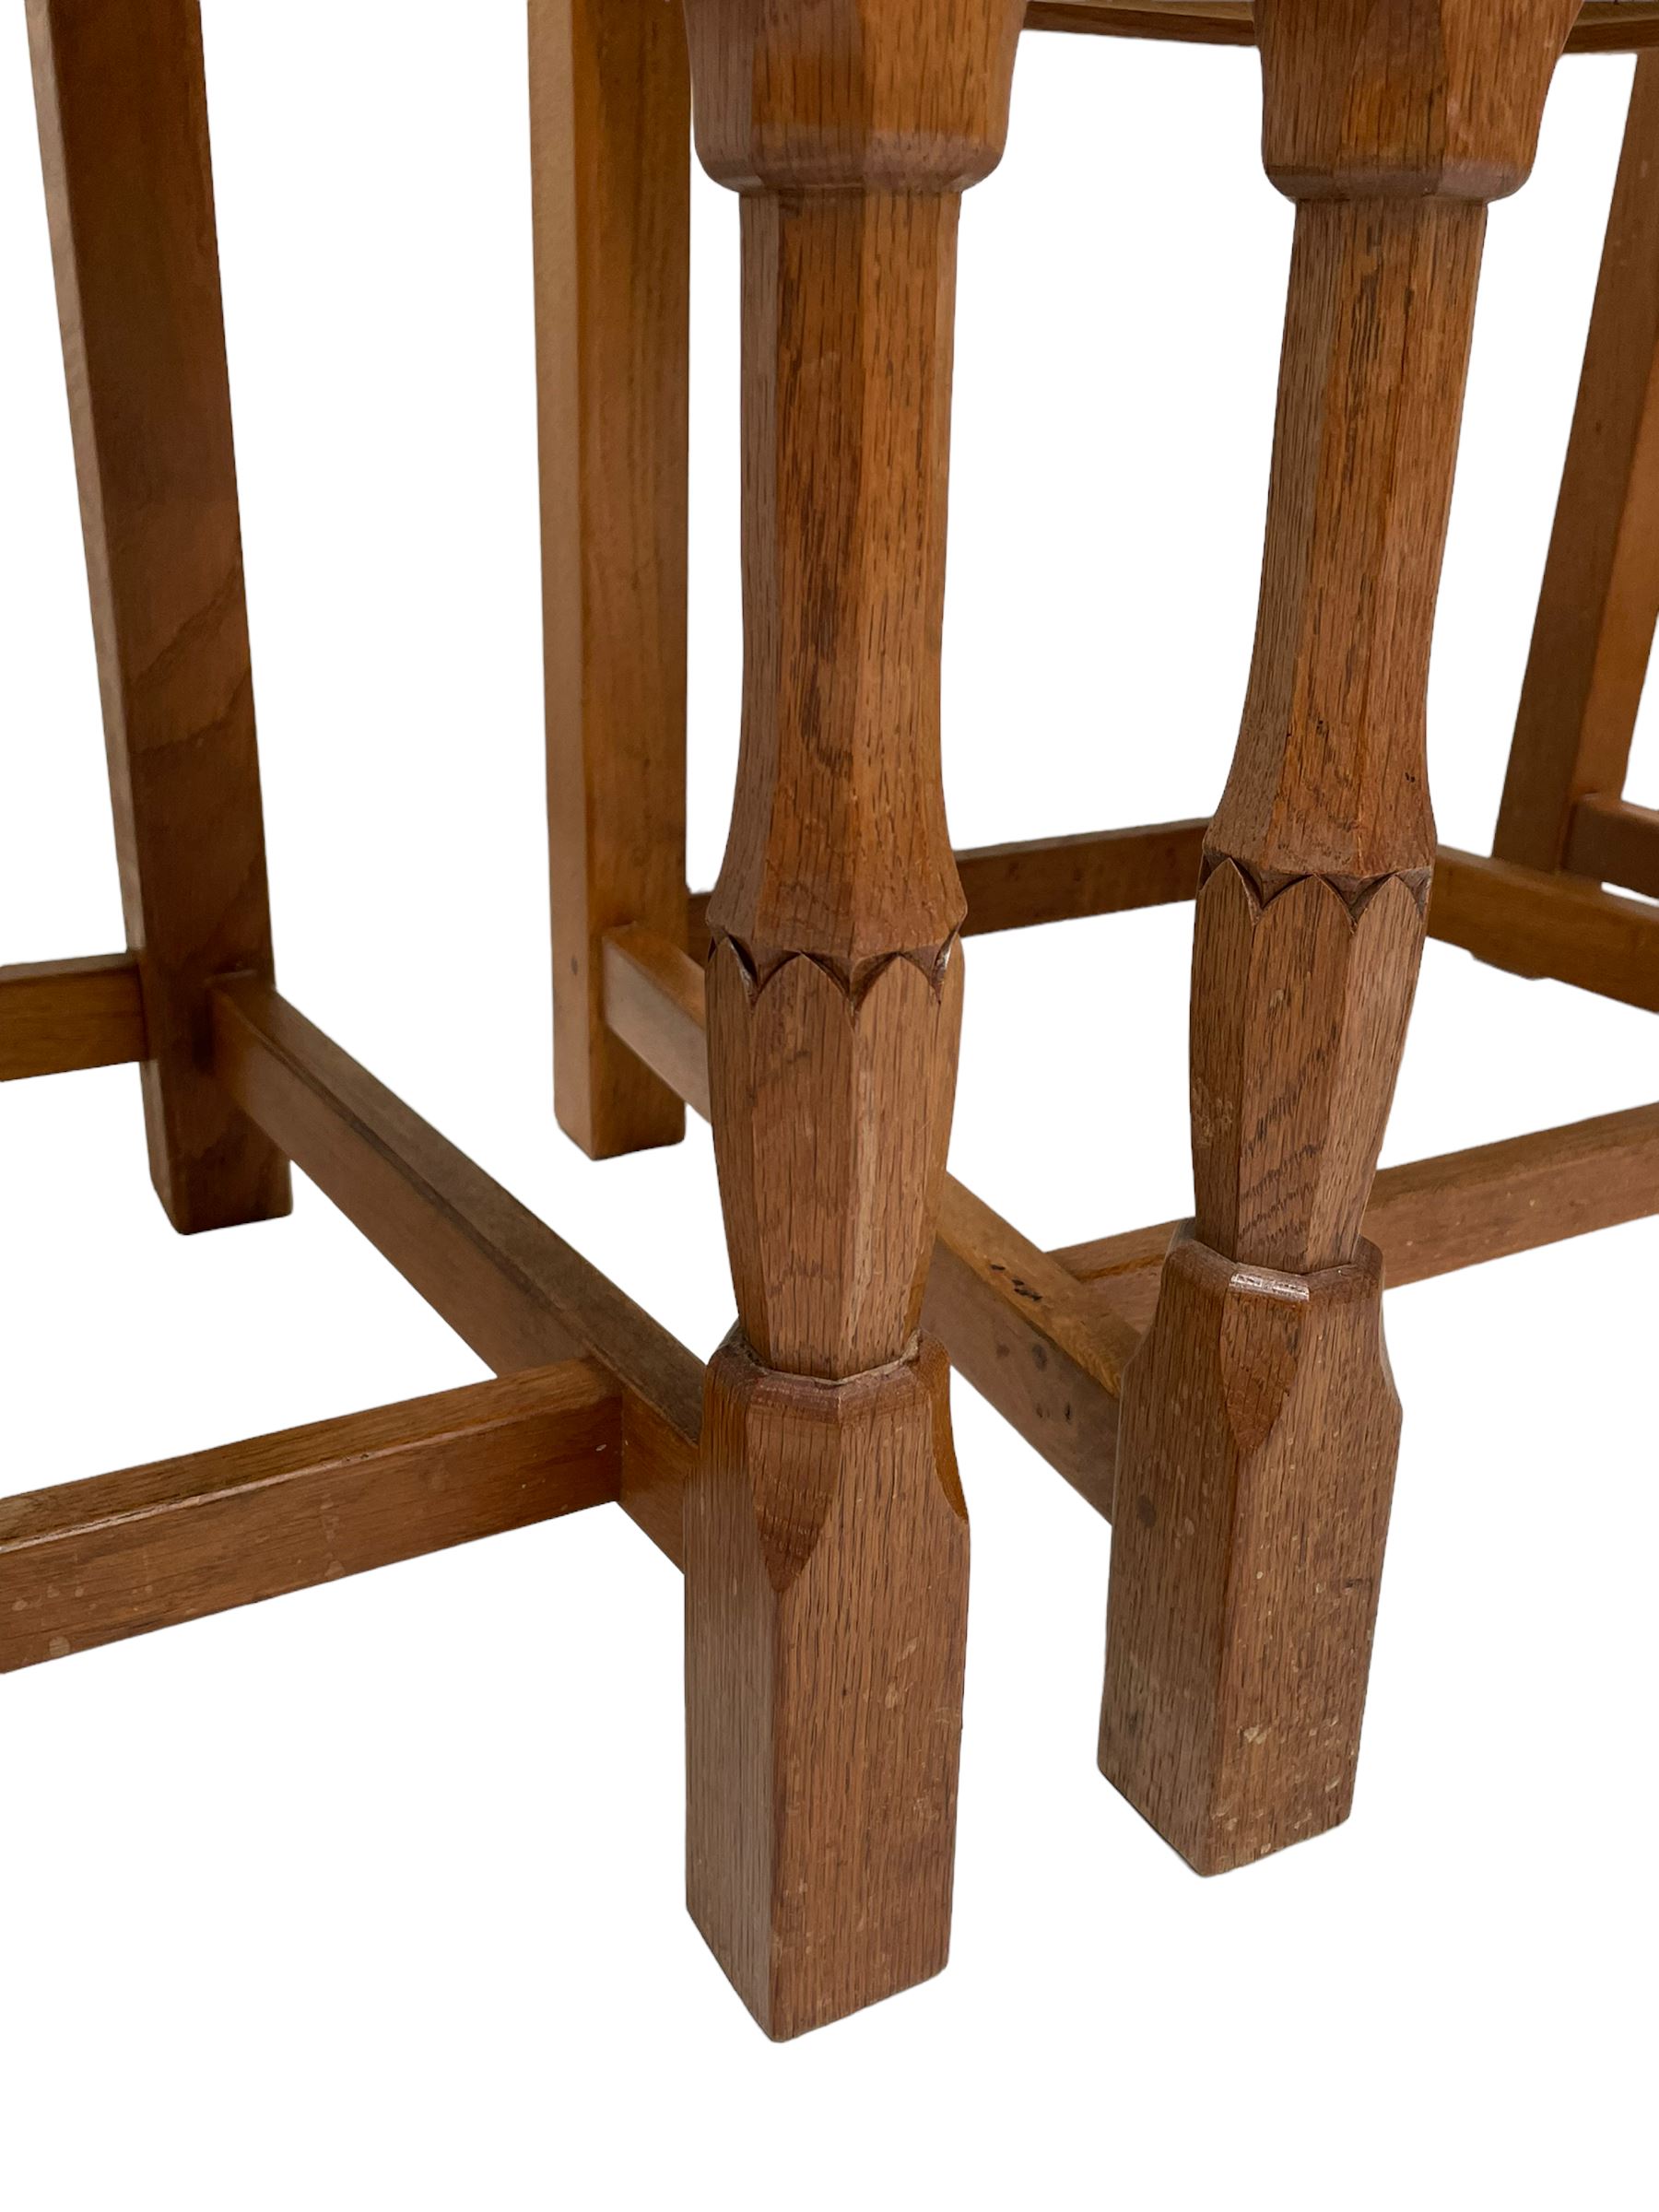 Wrenman - set four oak dining chairs - Image 7 of 10